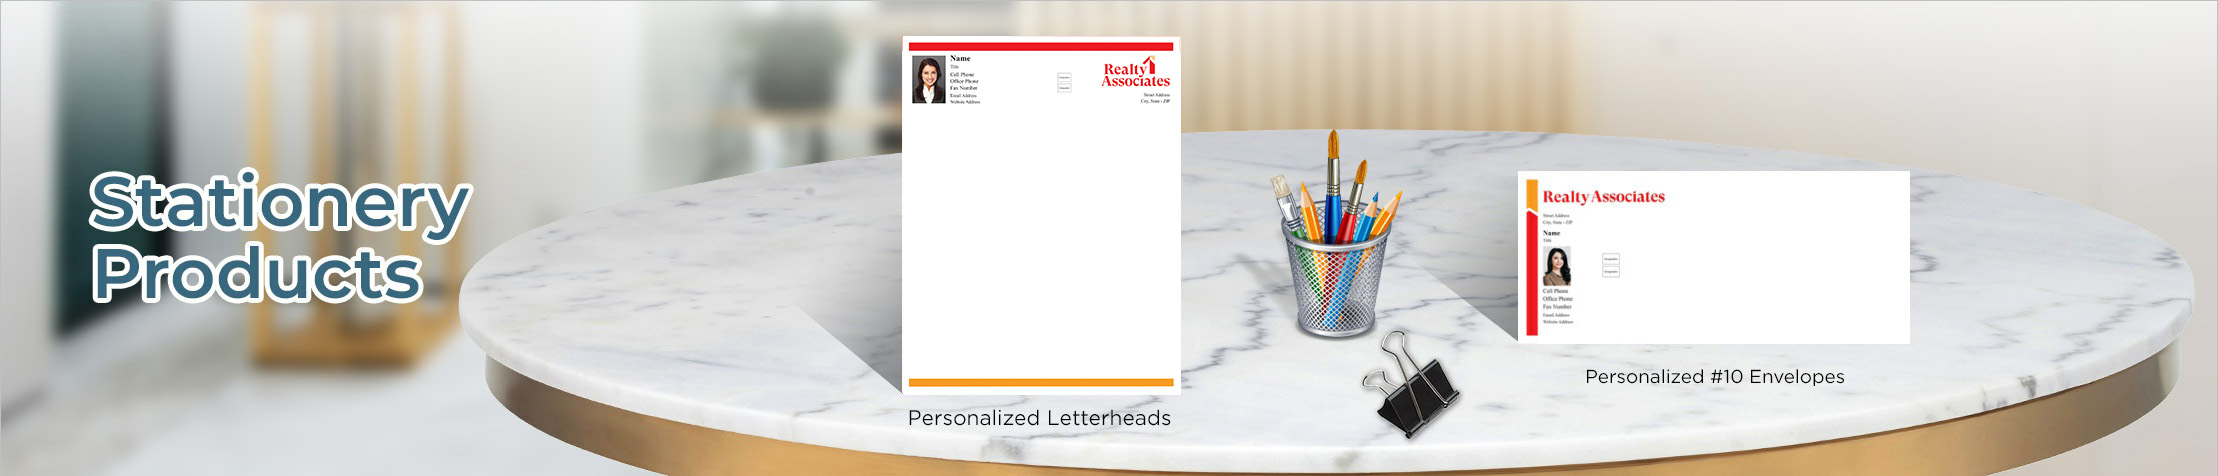 Realty Associates Real Estate Stationery Products - Custom Letterhead & Envelopes Stationery Products for Realtors | BestPrintBuy.com